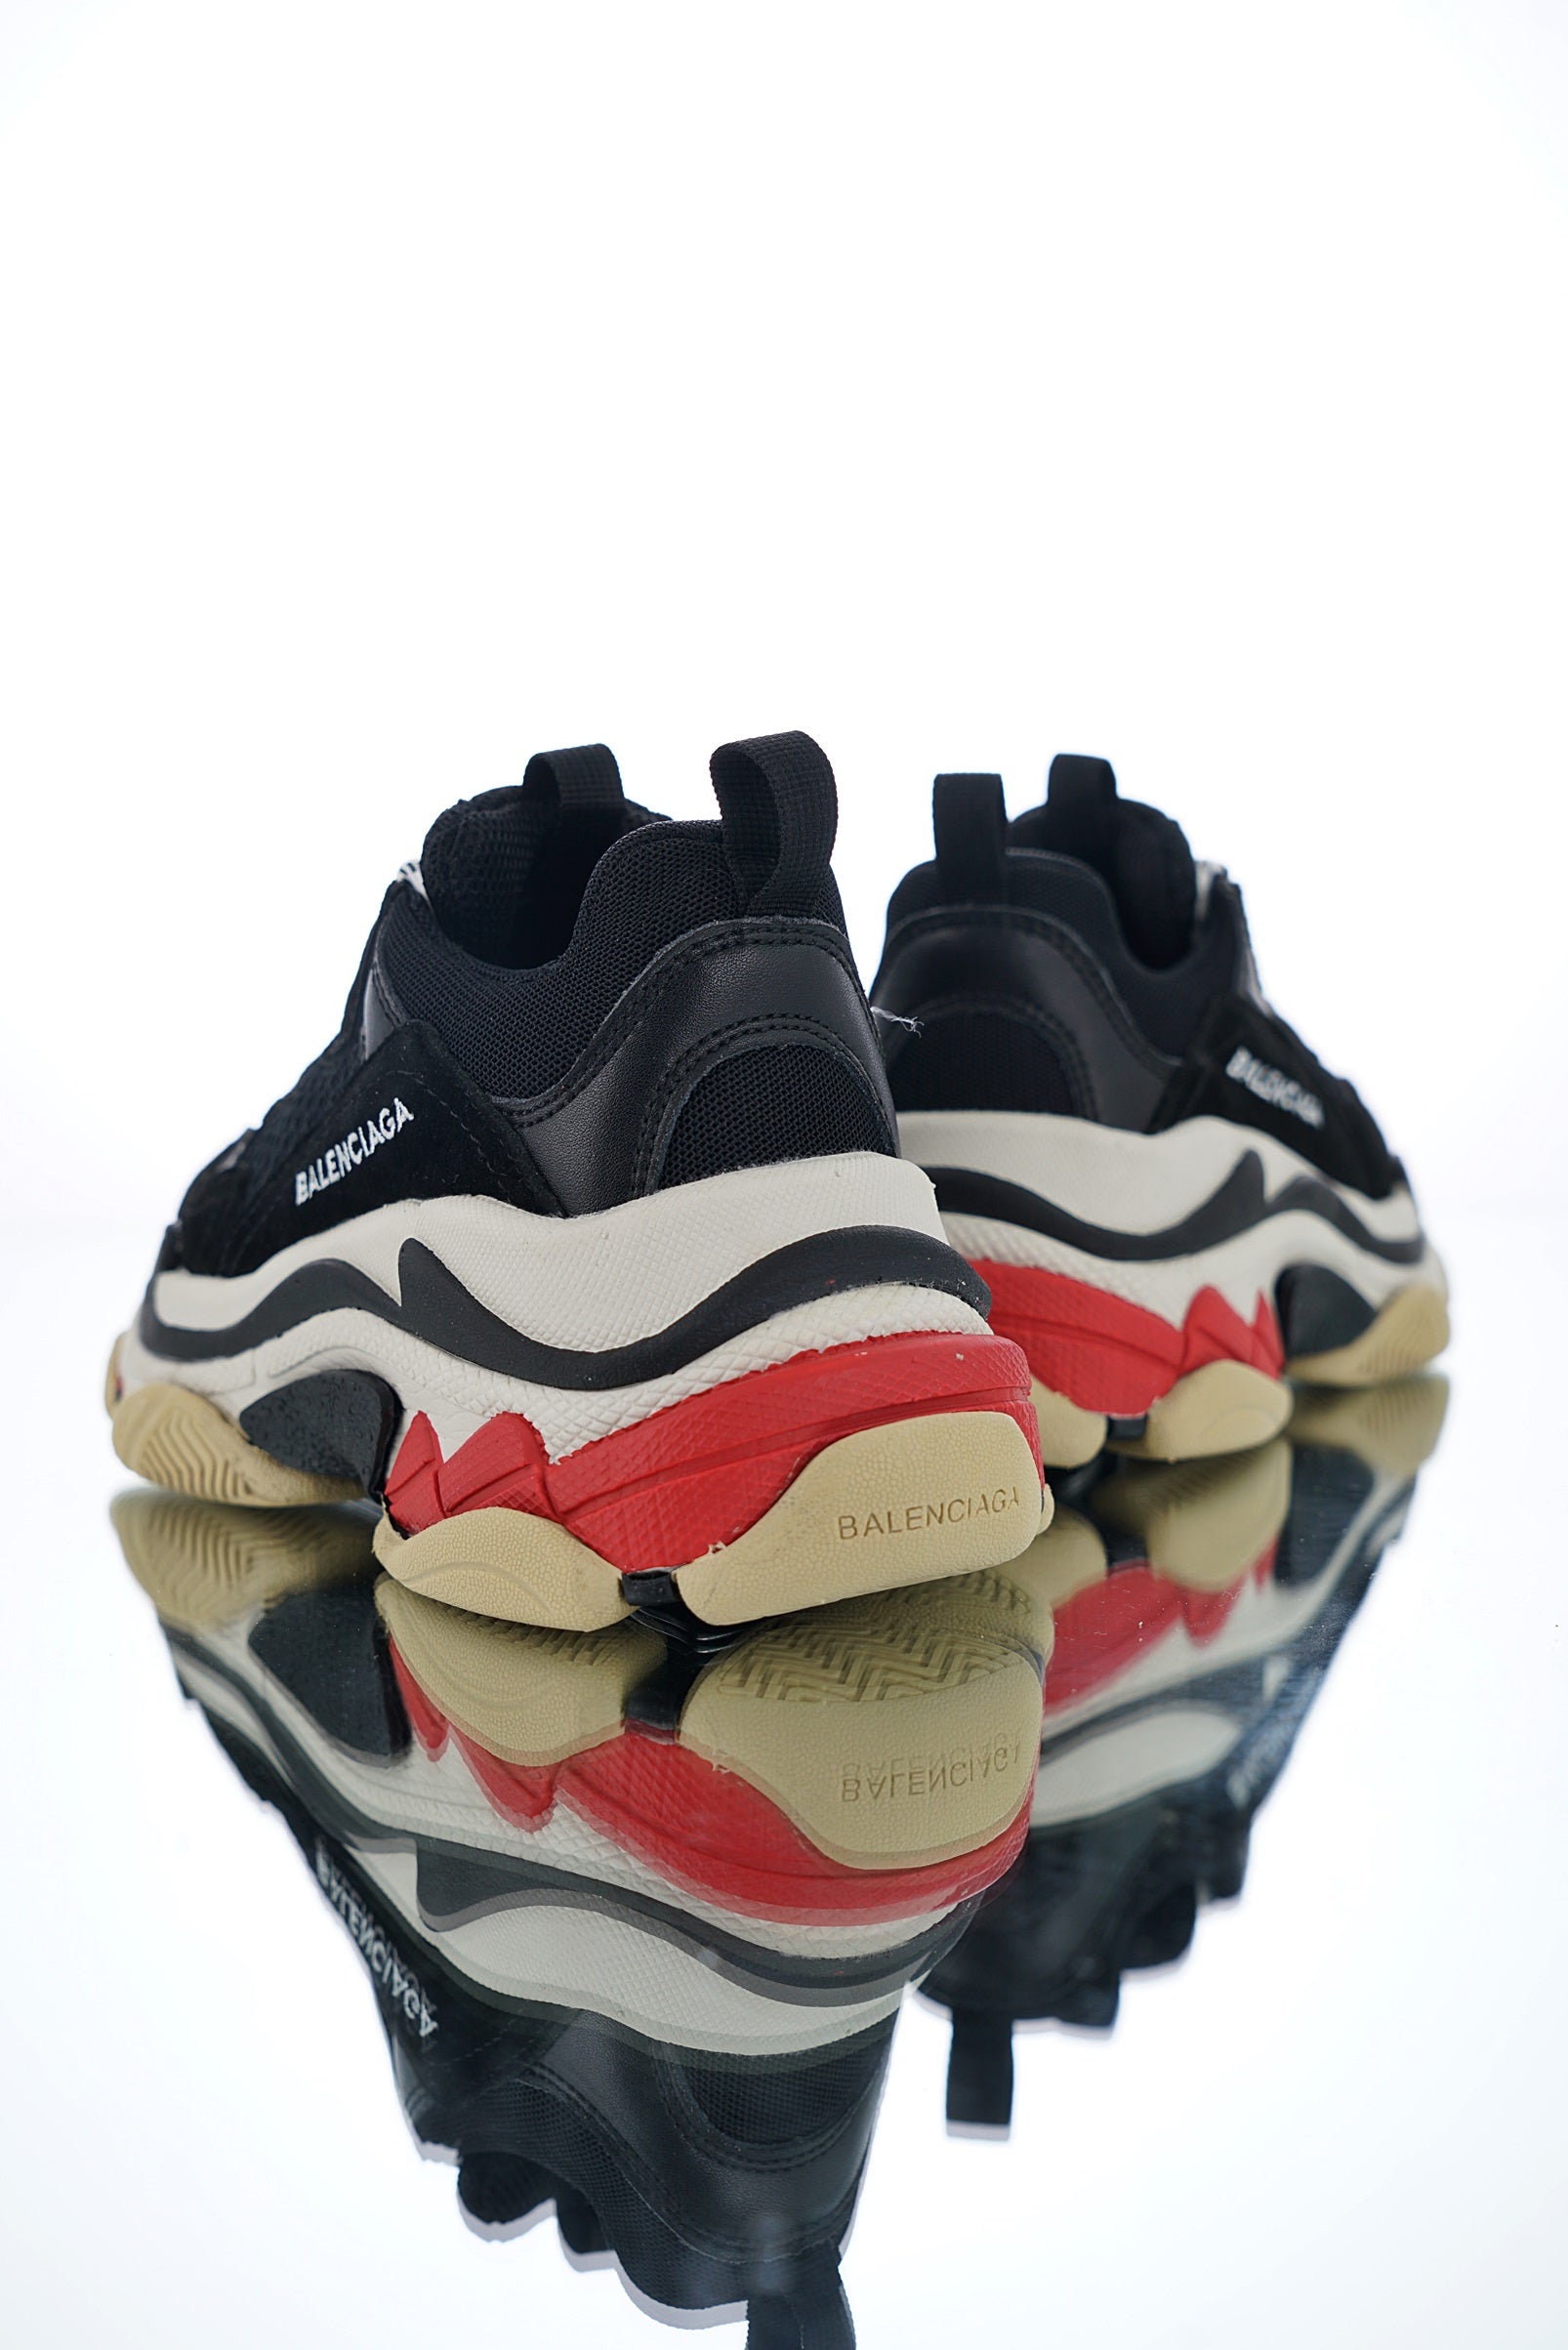 Triple s black and red solid sole - whatever on 